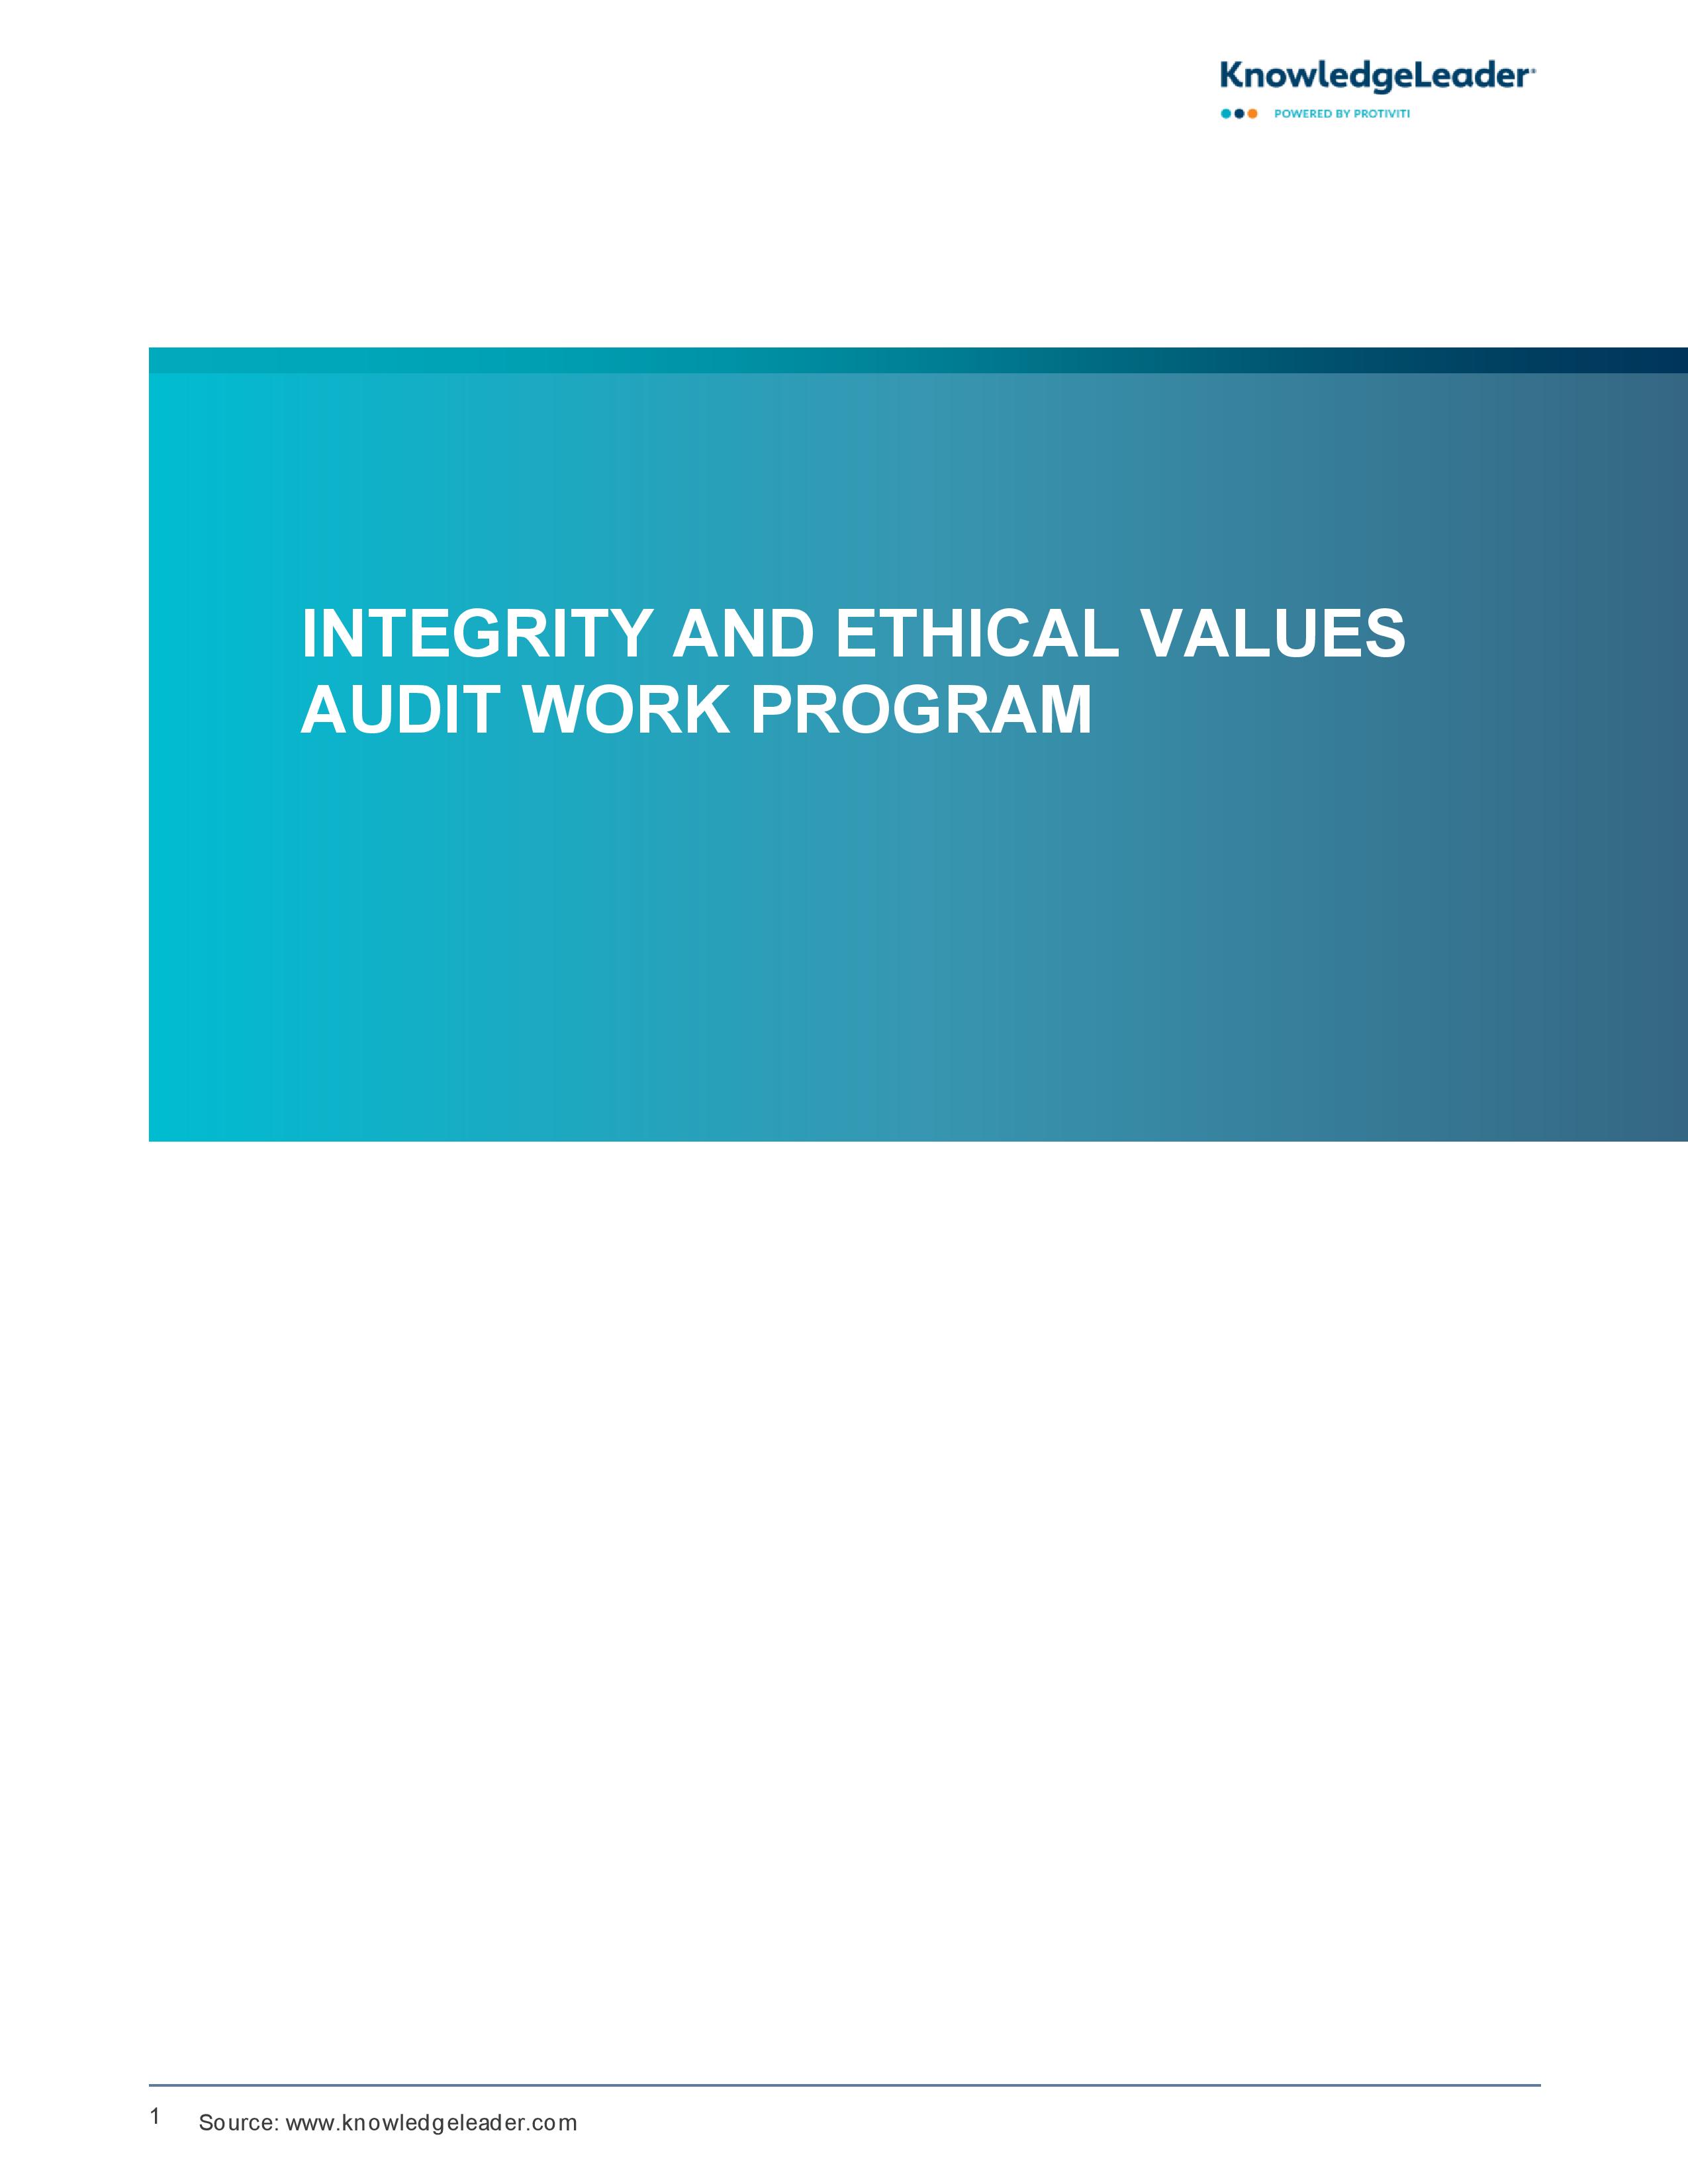 Screenshot of the first page of Integrity and Ethical Values Audit Work Program